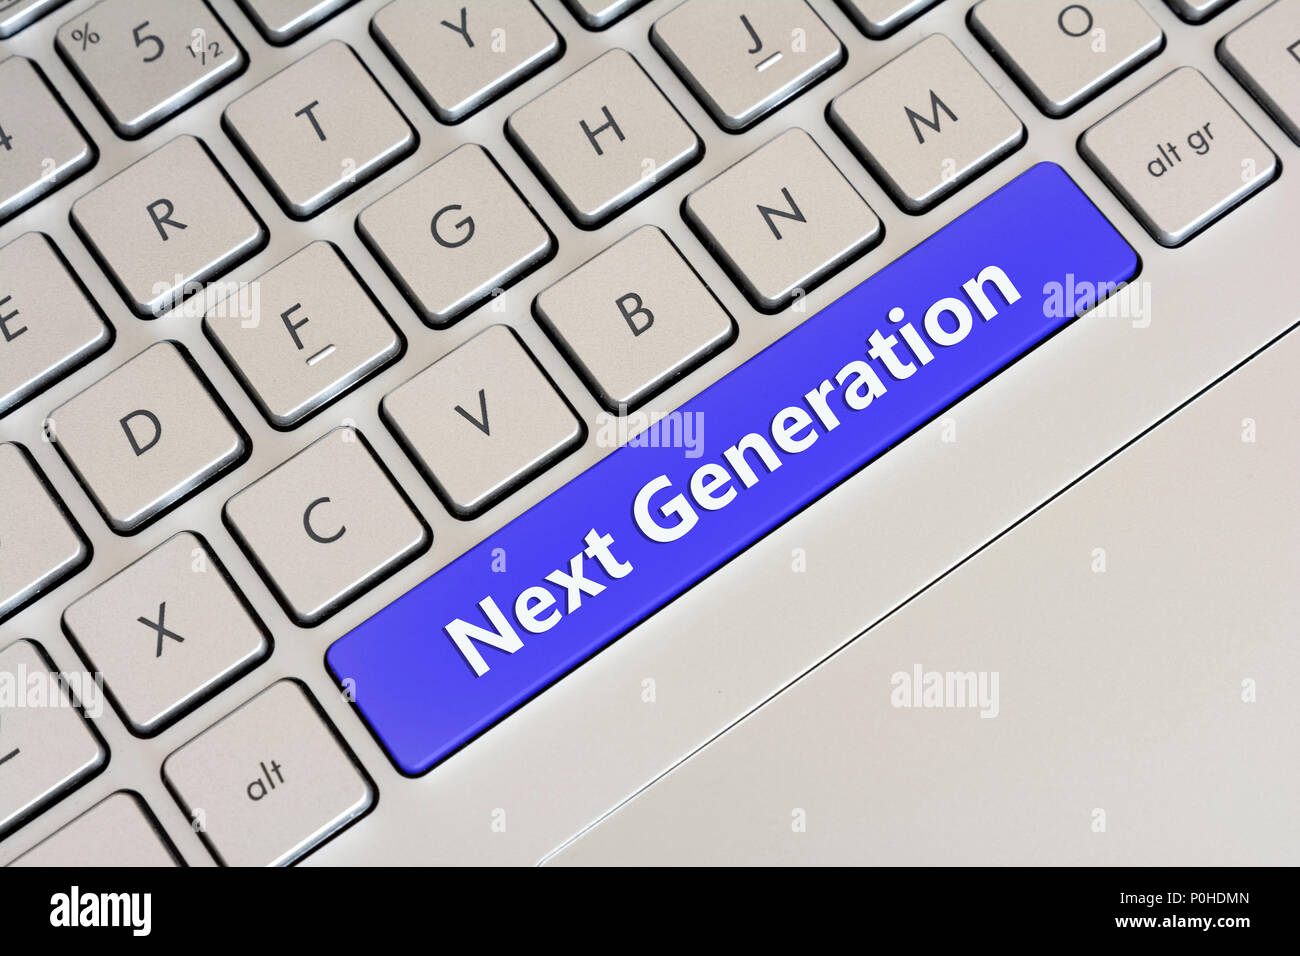 Clean Gray Laptop Keyboard With Blue Spacebar Writing 'Next Generation' Stock Photo